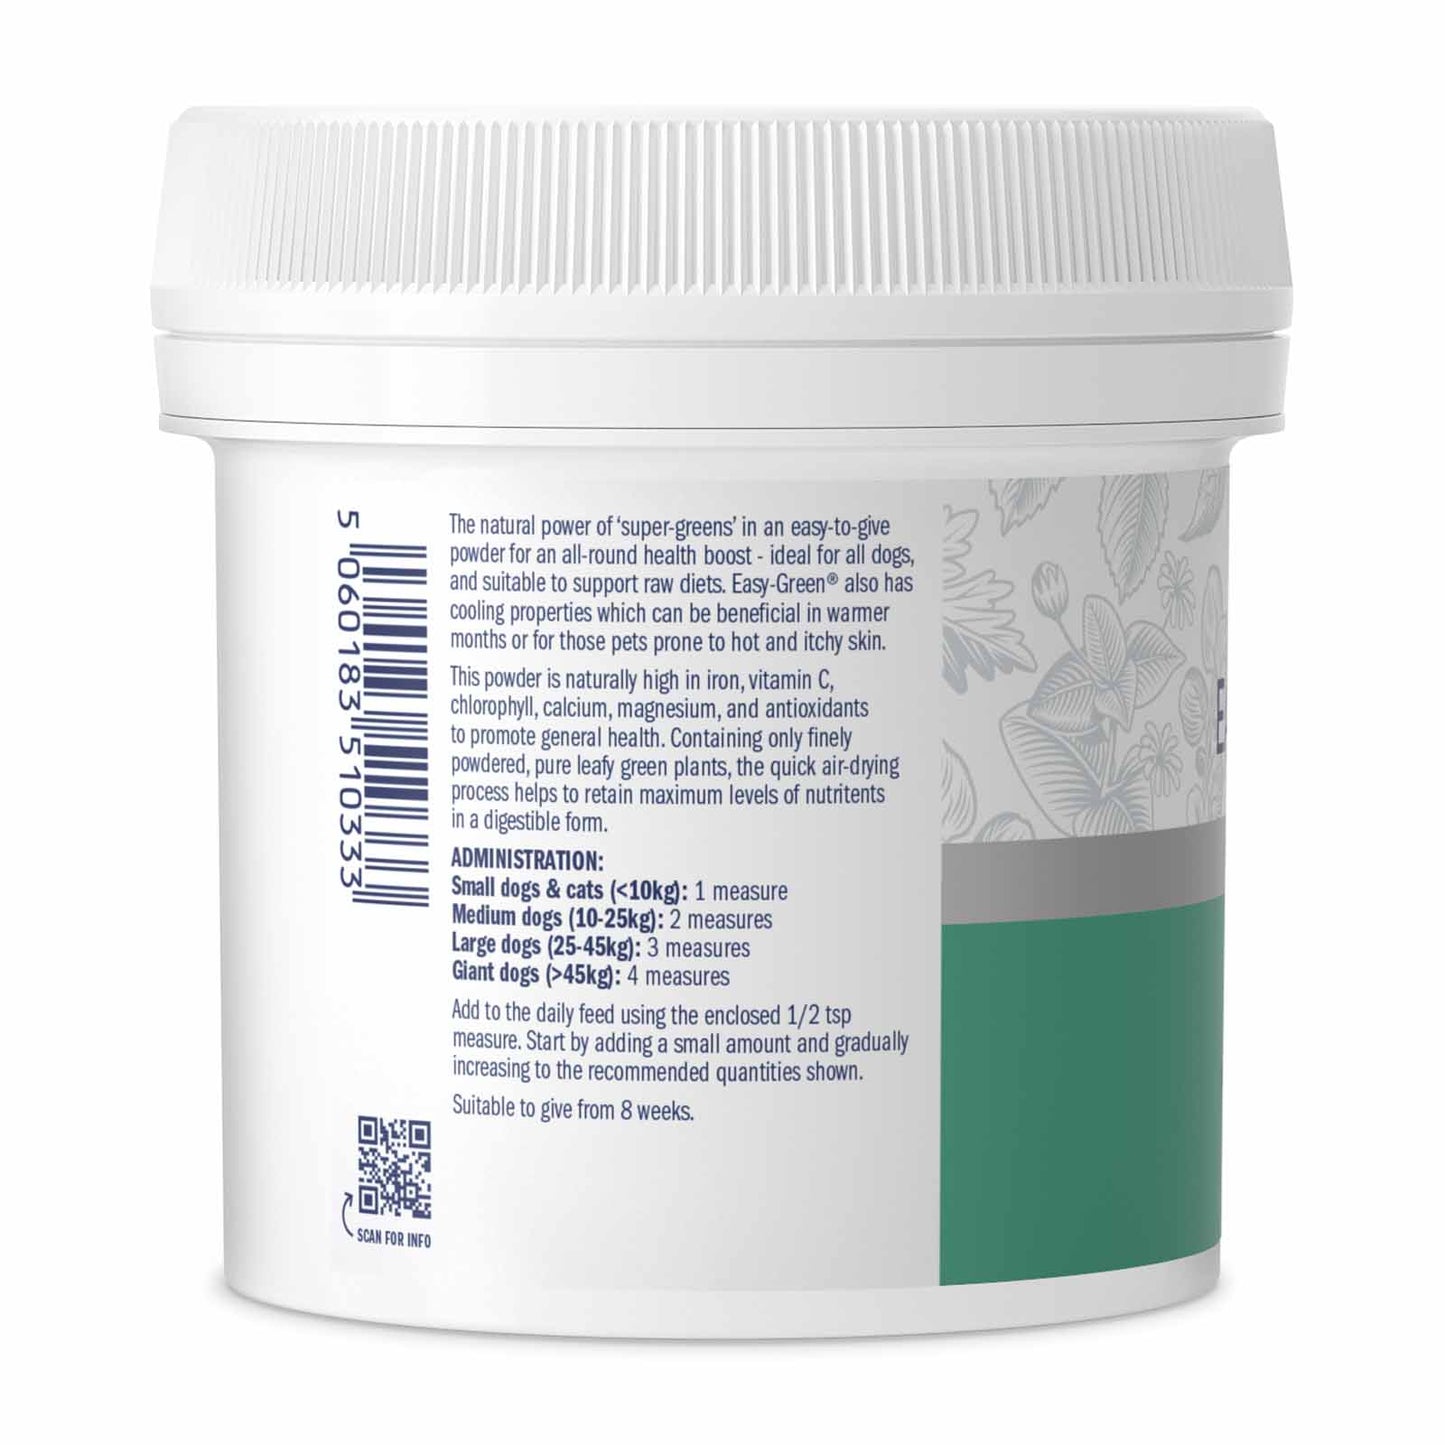 Dorwest Easy Green Powder For Dogs And Cats (All-Round Health Boost)